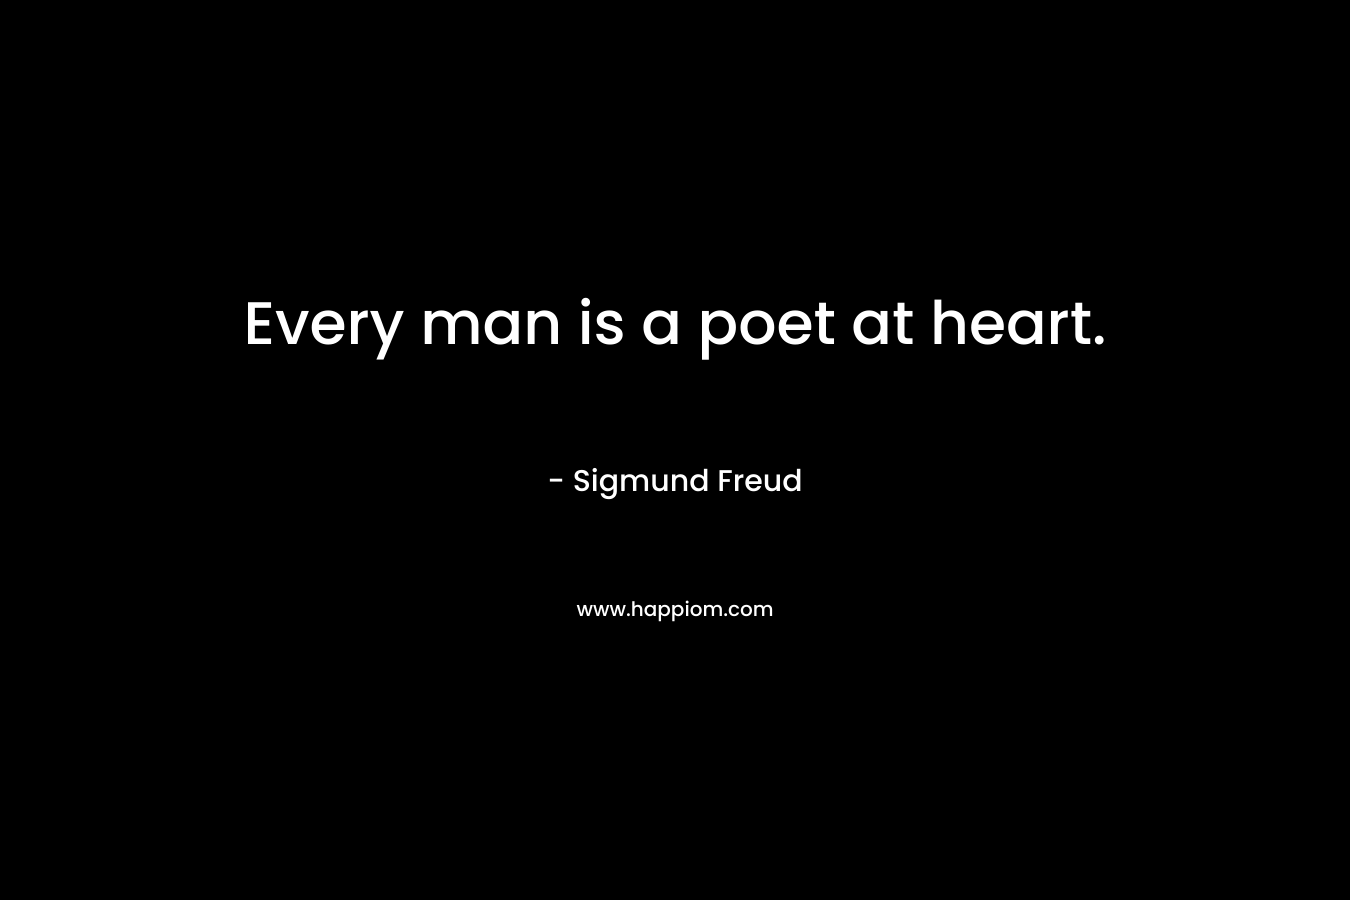 Every man is a poet at heart.